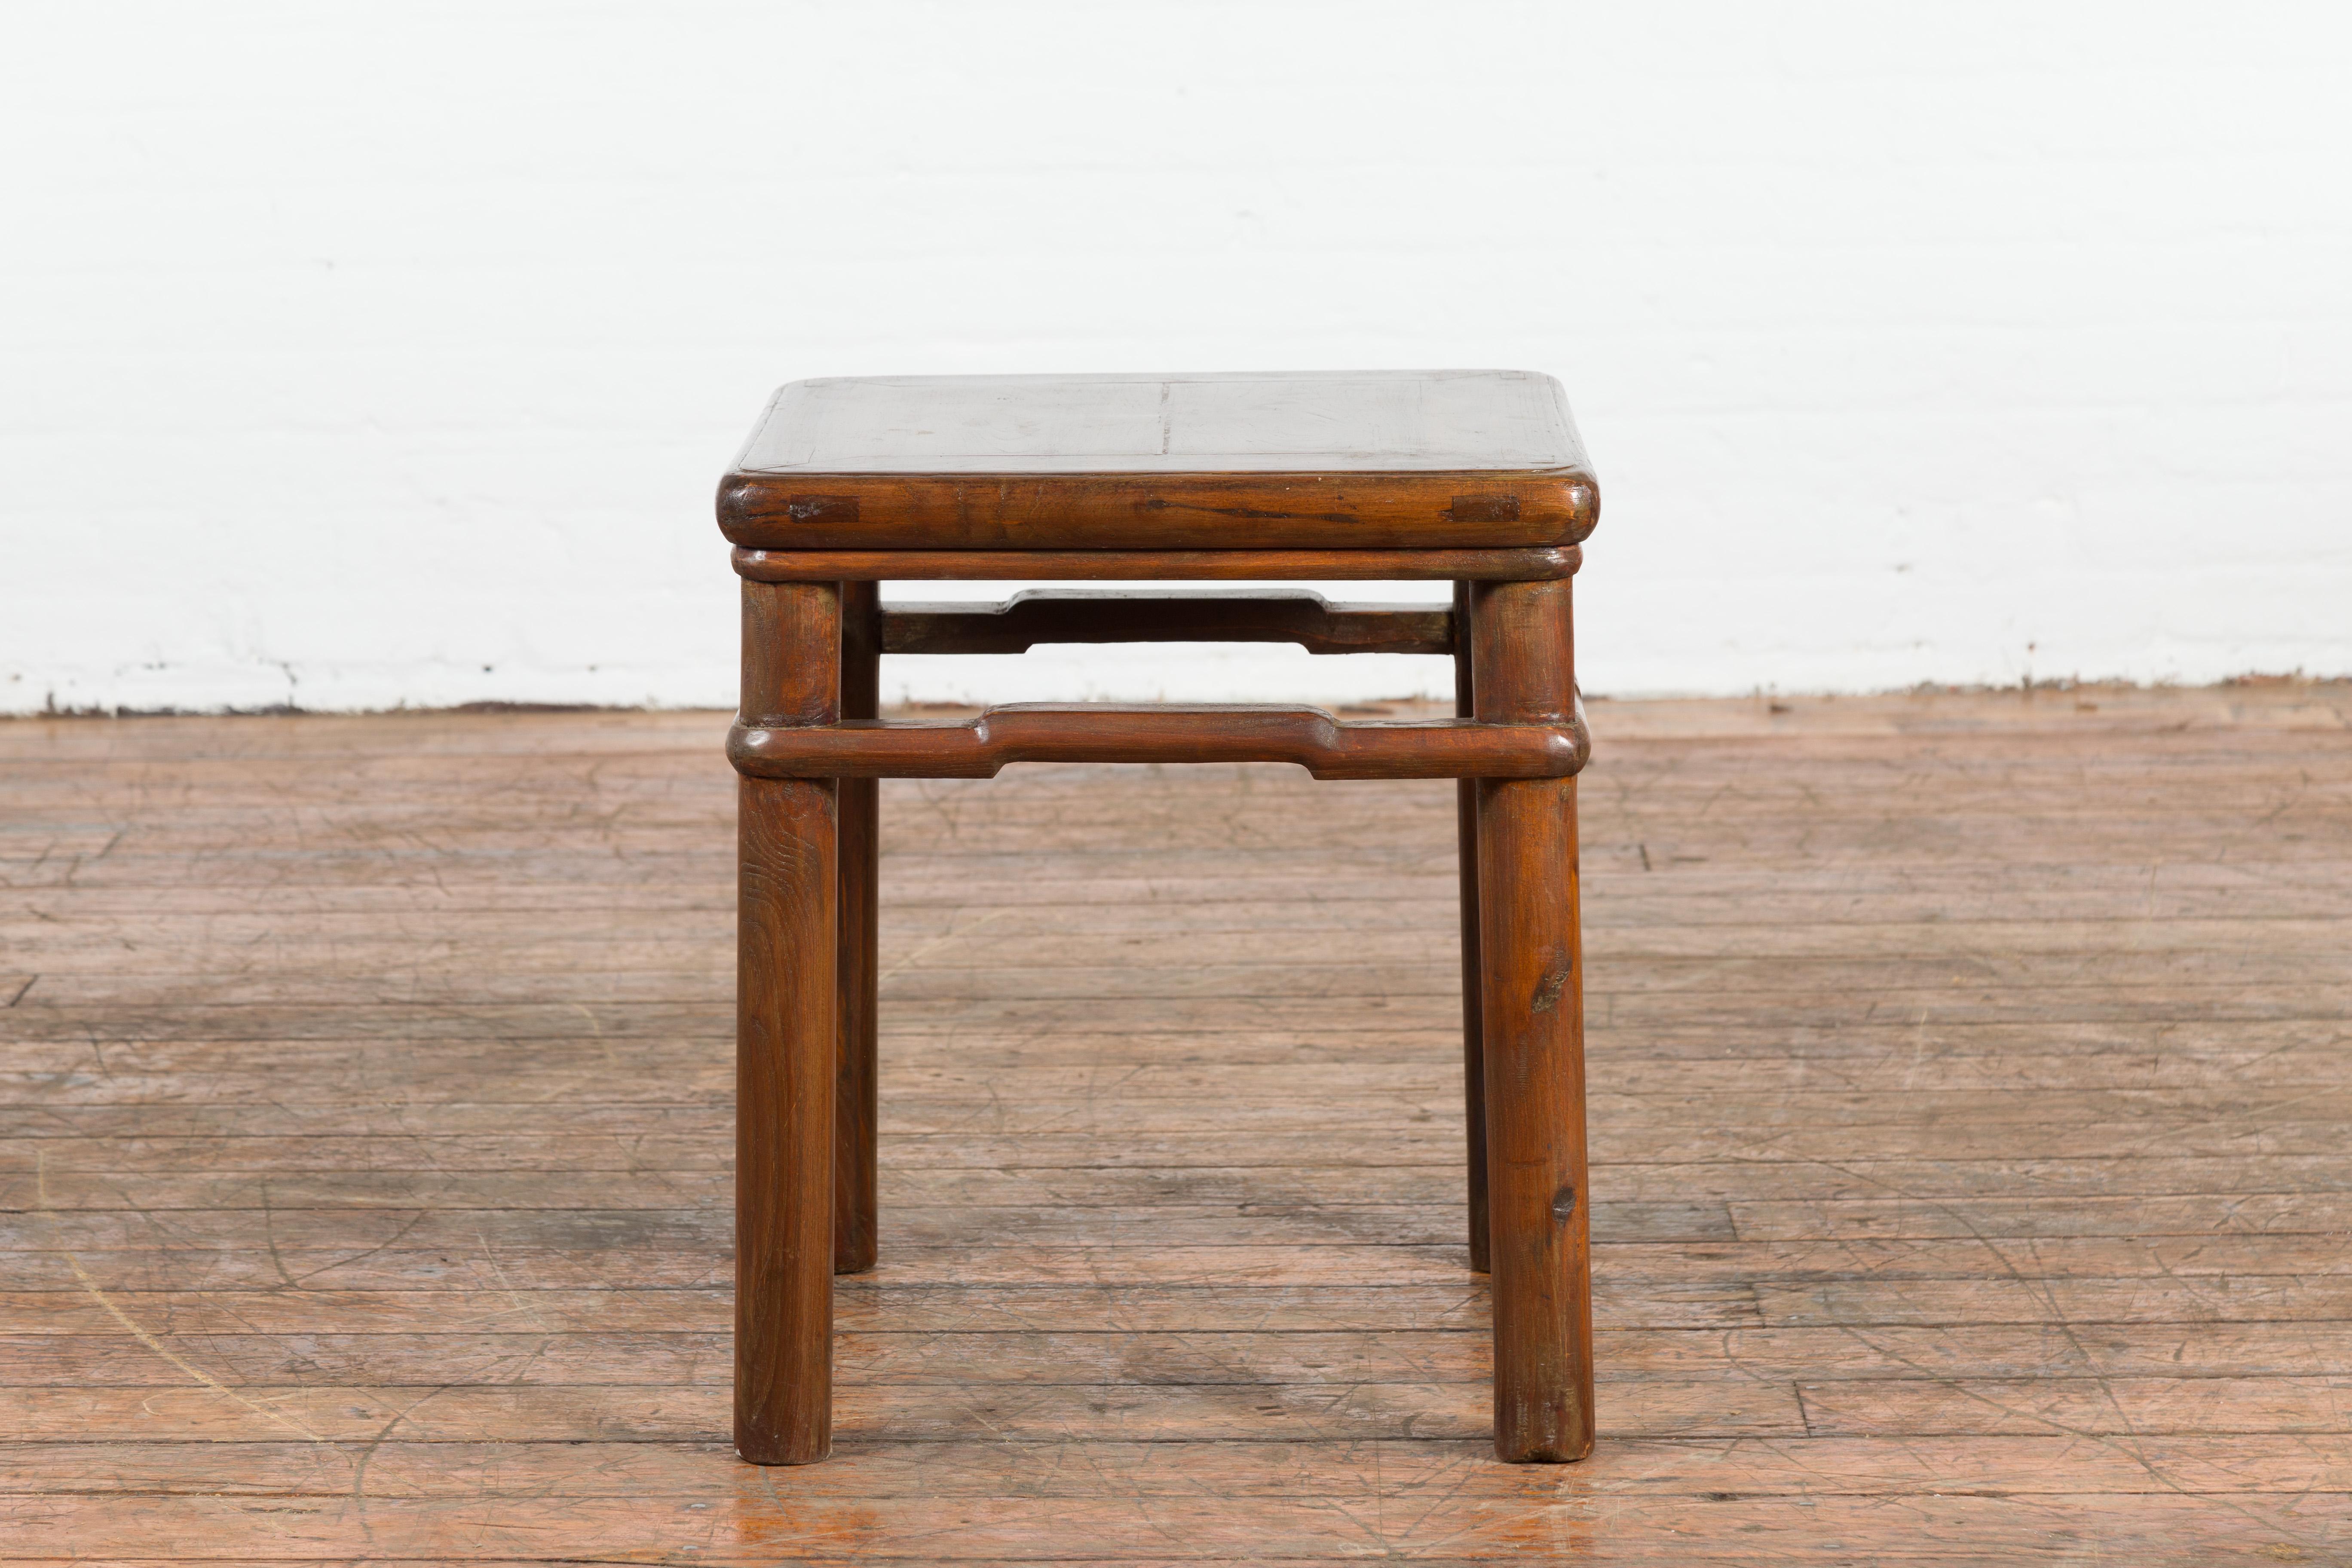 Chinese Qing Dynasty Period 19th Century Side Table with Humpback Stretchers For Sale 8